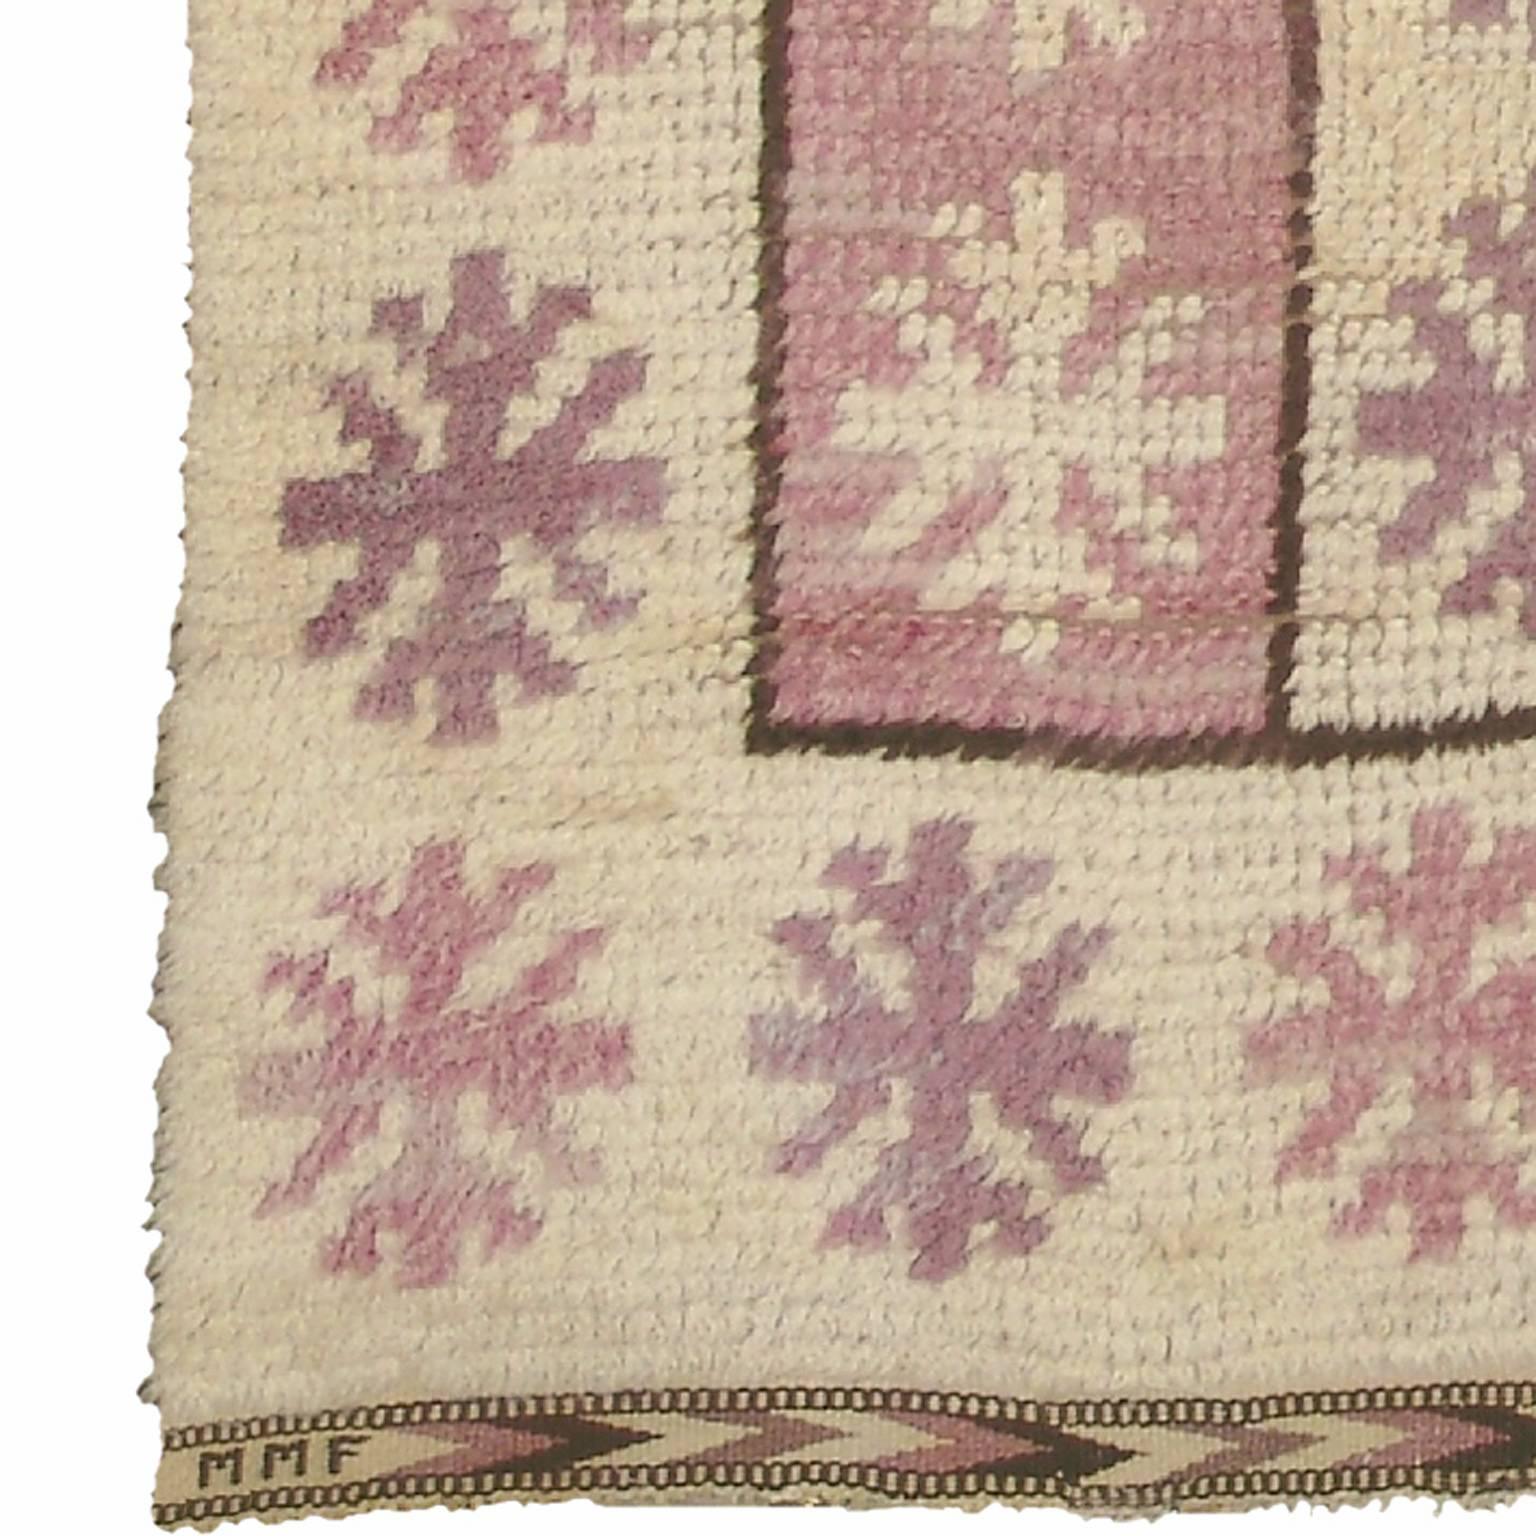 Mid-20th century Swedish pile carpet.
Sweden ca. 1940
handwoven
Initialed: MMF (Märta Måås-Fjetterström).